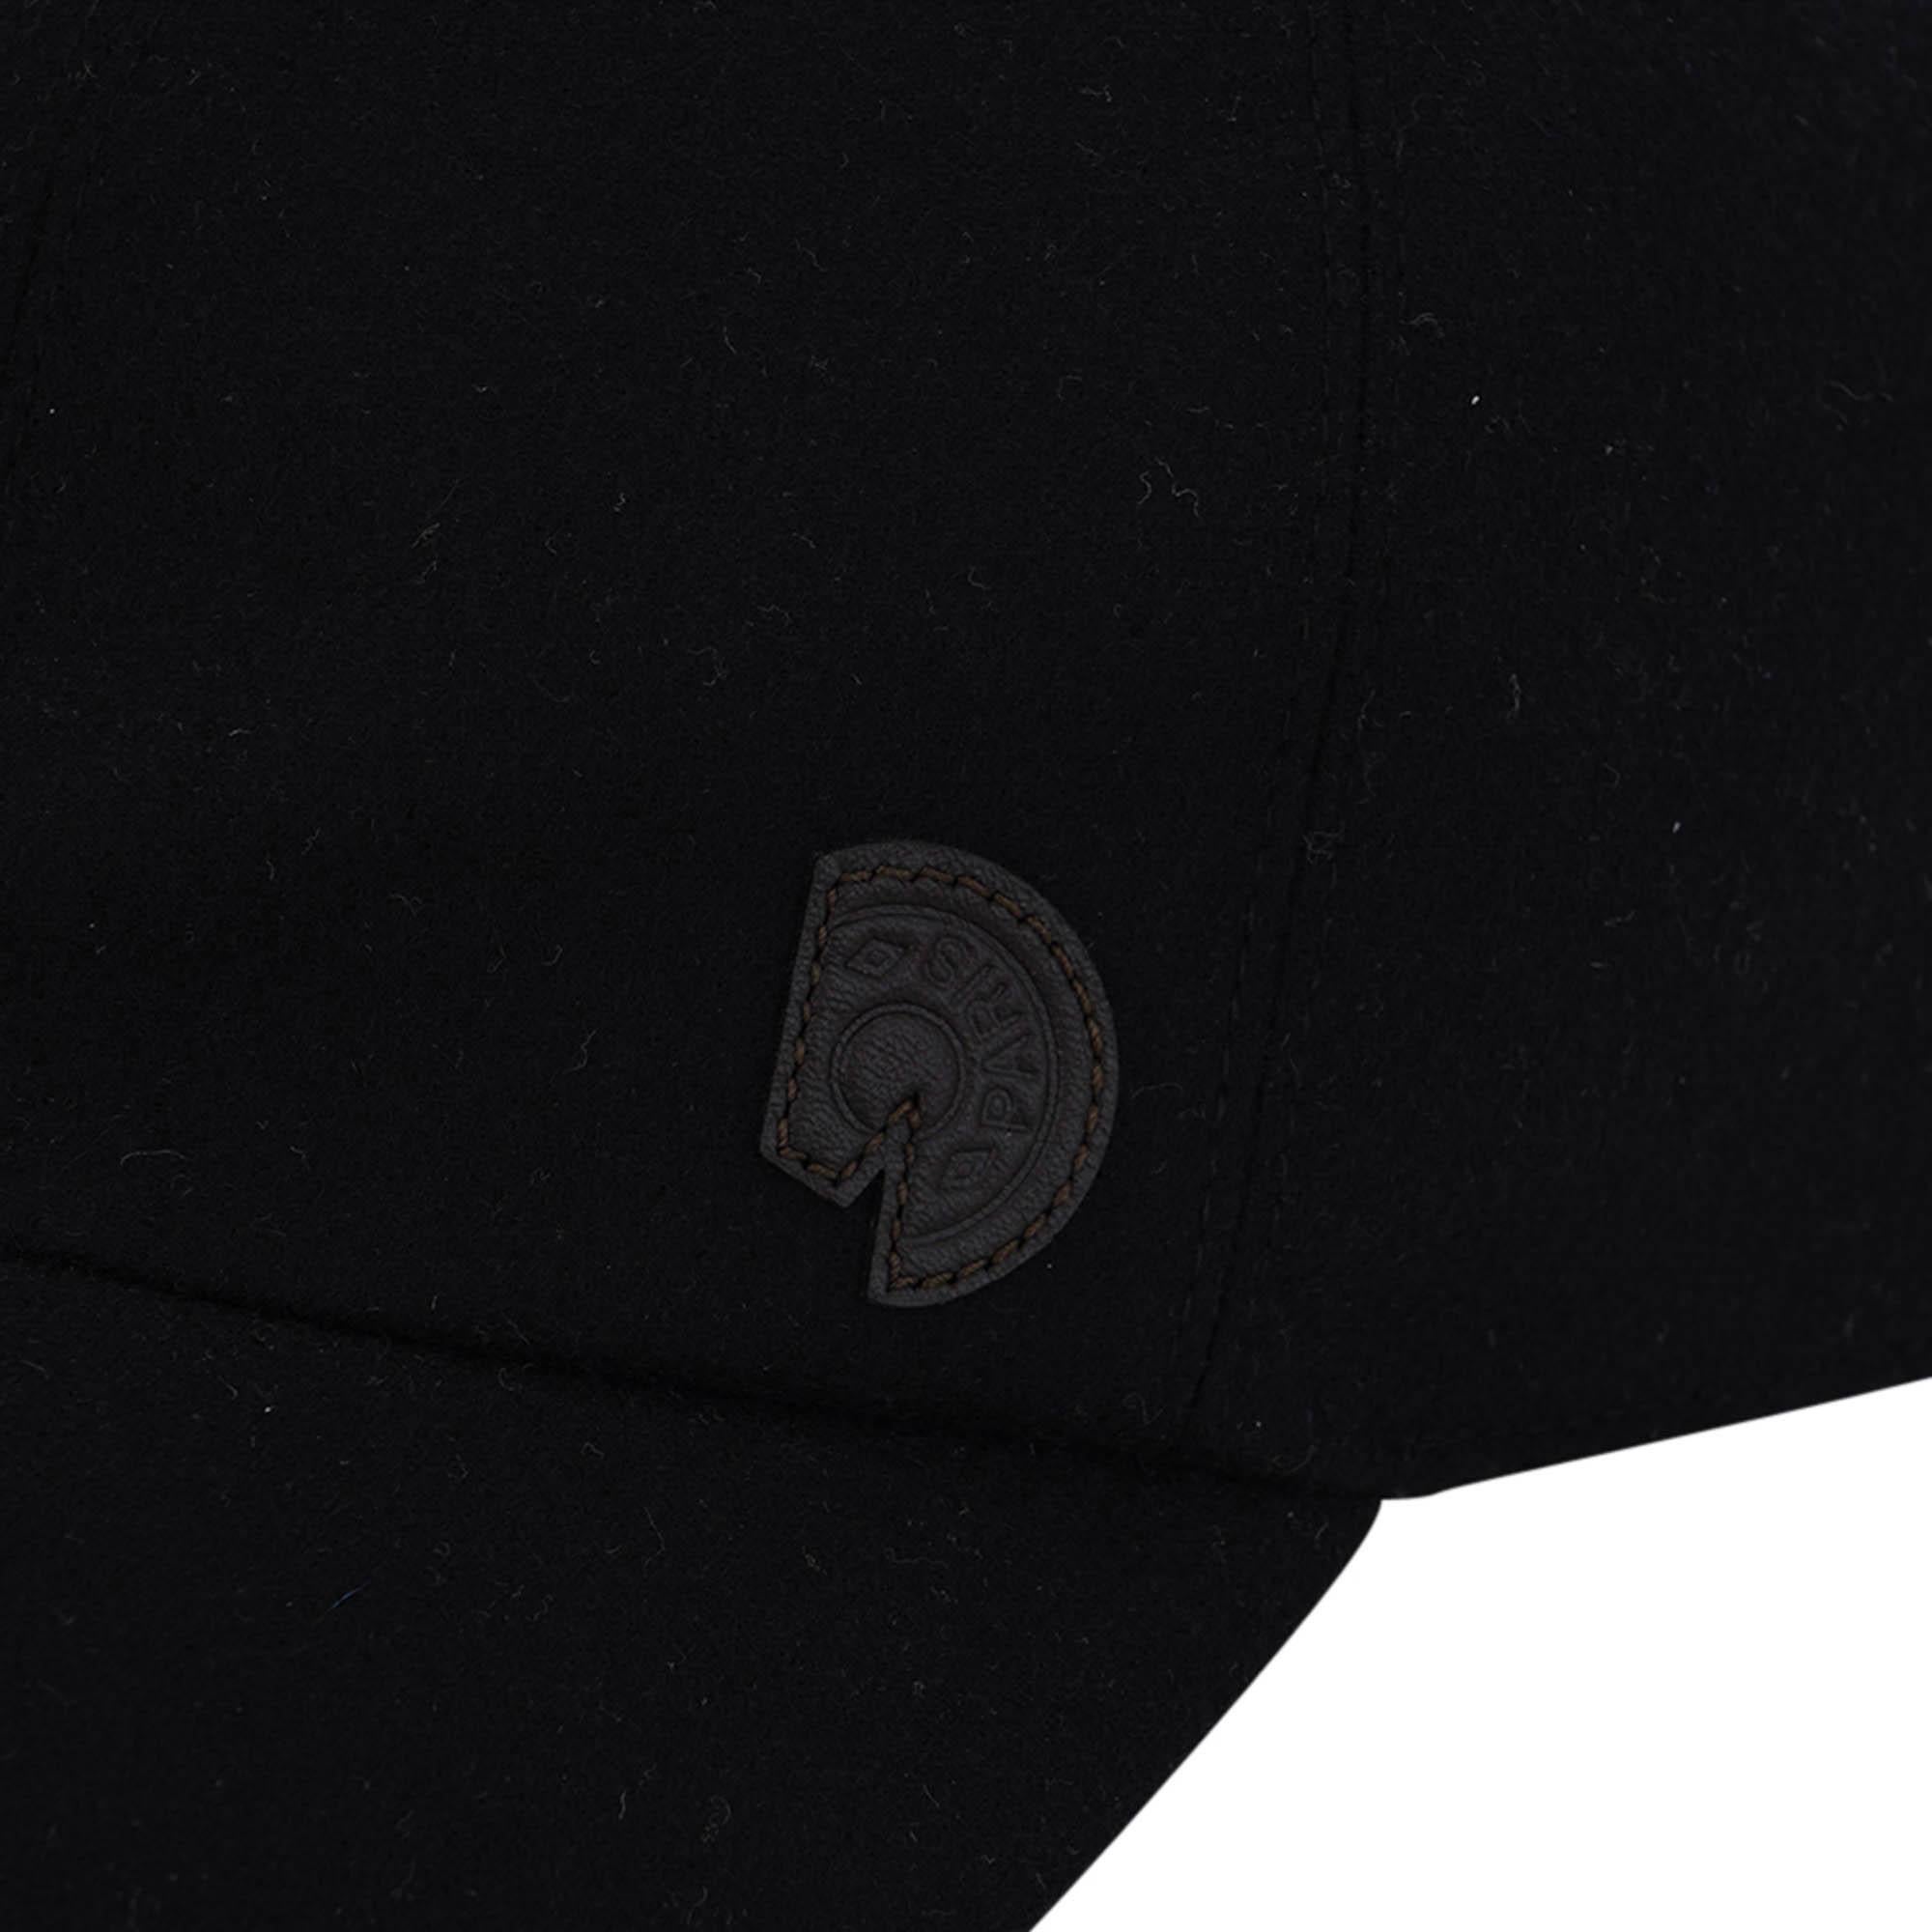 Mightychic offers an Hermes Riley Clou Carrousel Cap featured in Black.
Swift calfskin Clou Carrousel on side.
Cap is wool flannel.
Interior woven badge Cheval de Fete by Jan Bajtlik.
Adjustment tab with two Palladium plated Clou de Selle